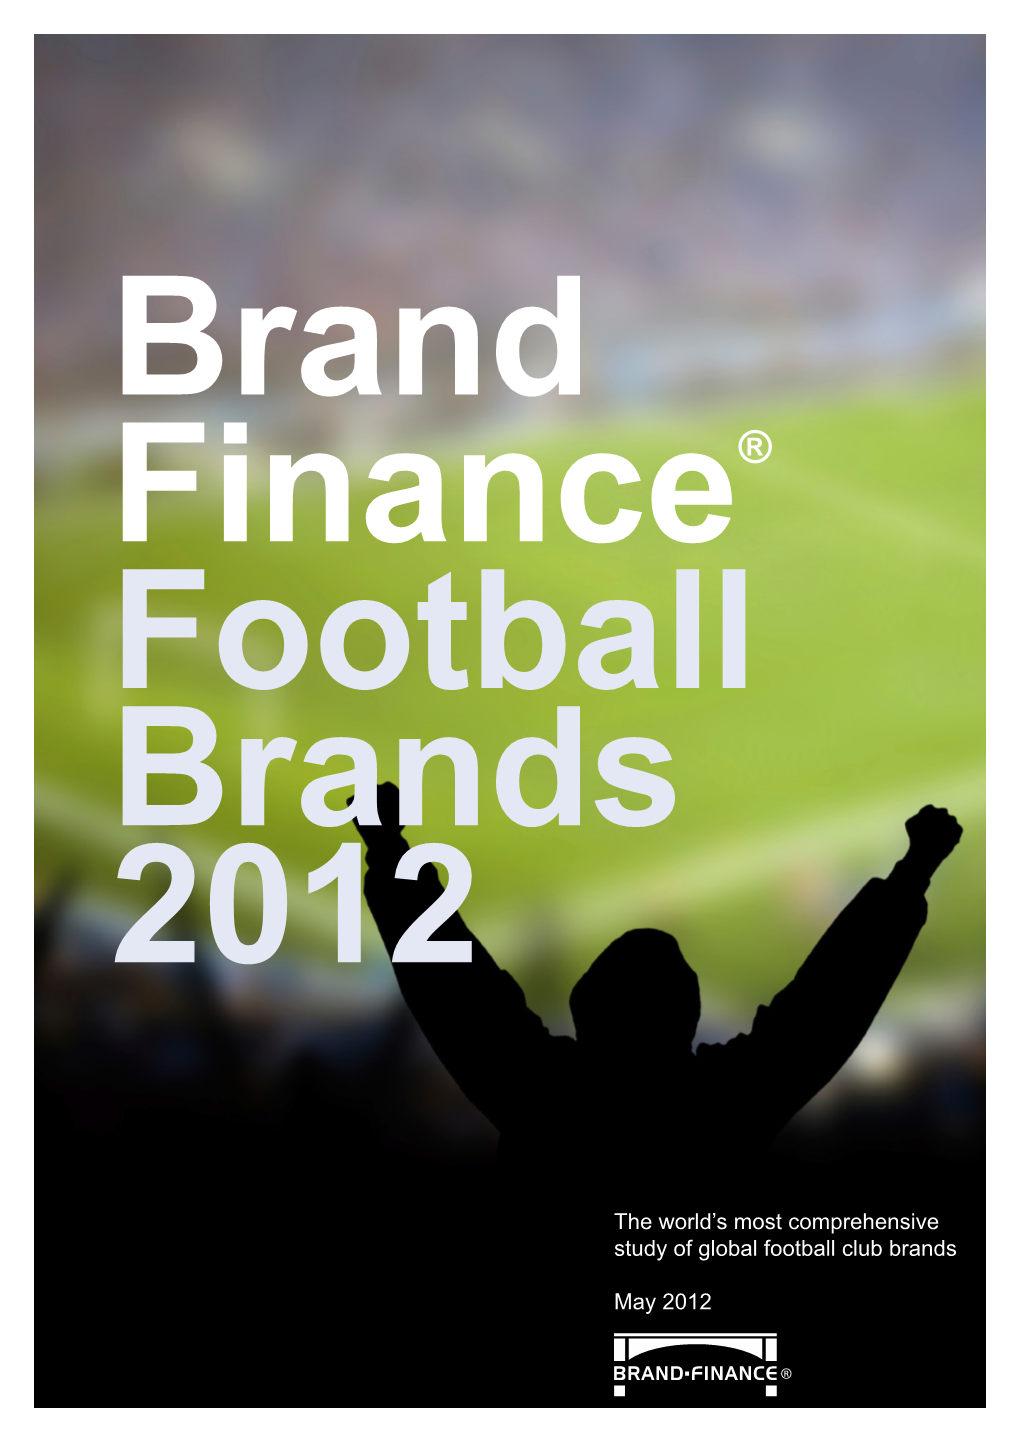 Brand Finance Football Brands 2012 Puts the to the US Staples of NFL, MLB, NBA and NHL